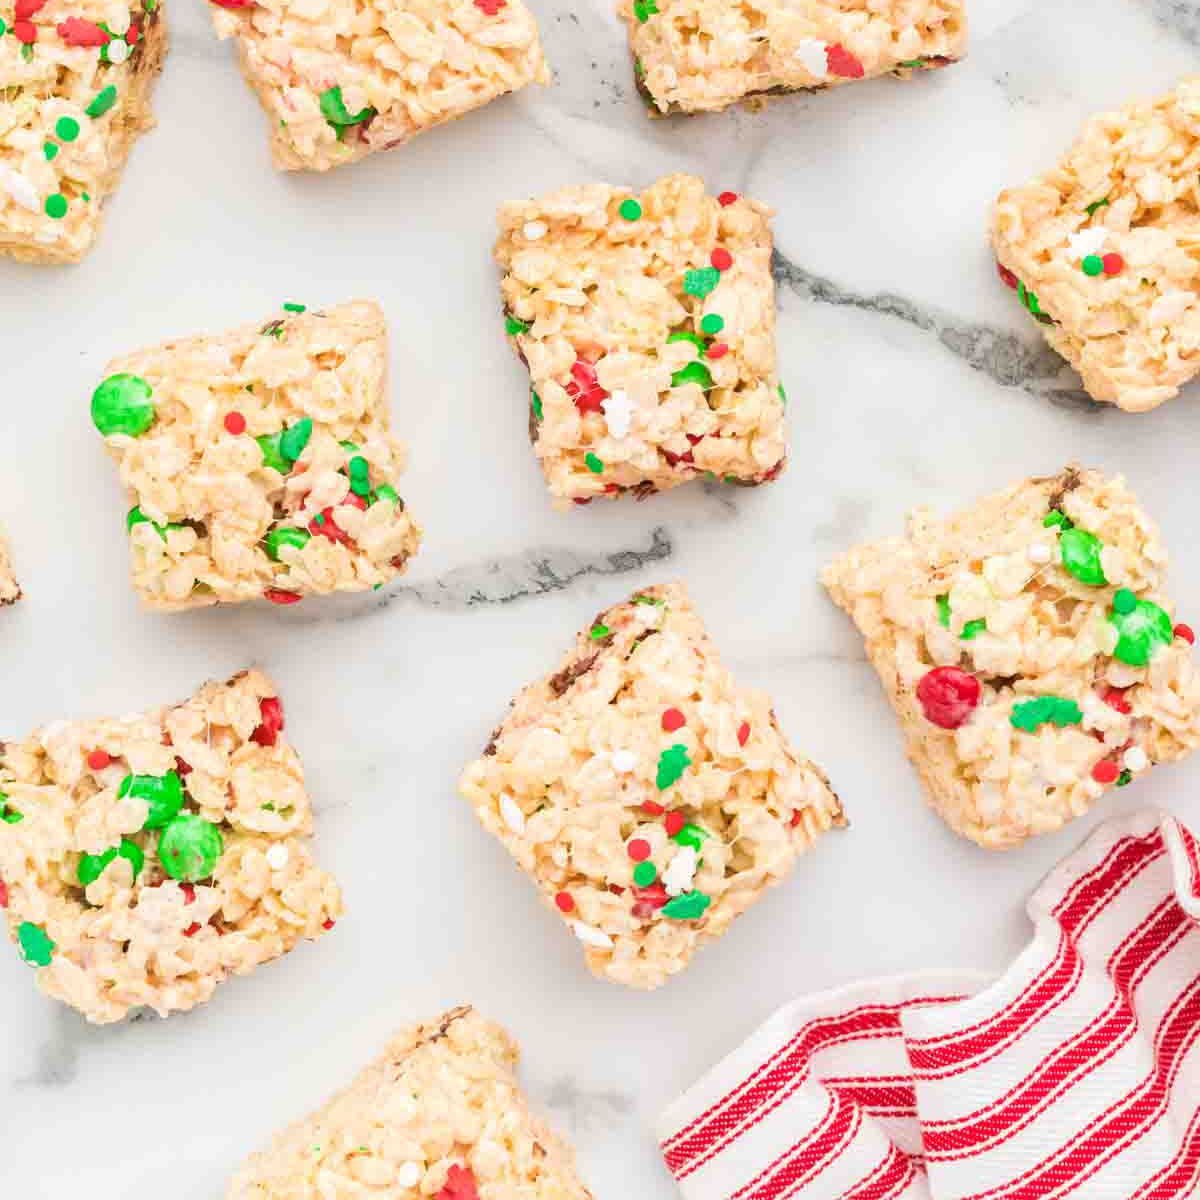 rice krispies treats with m&ms